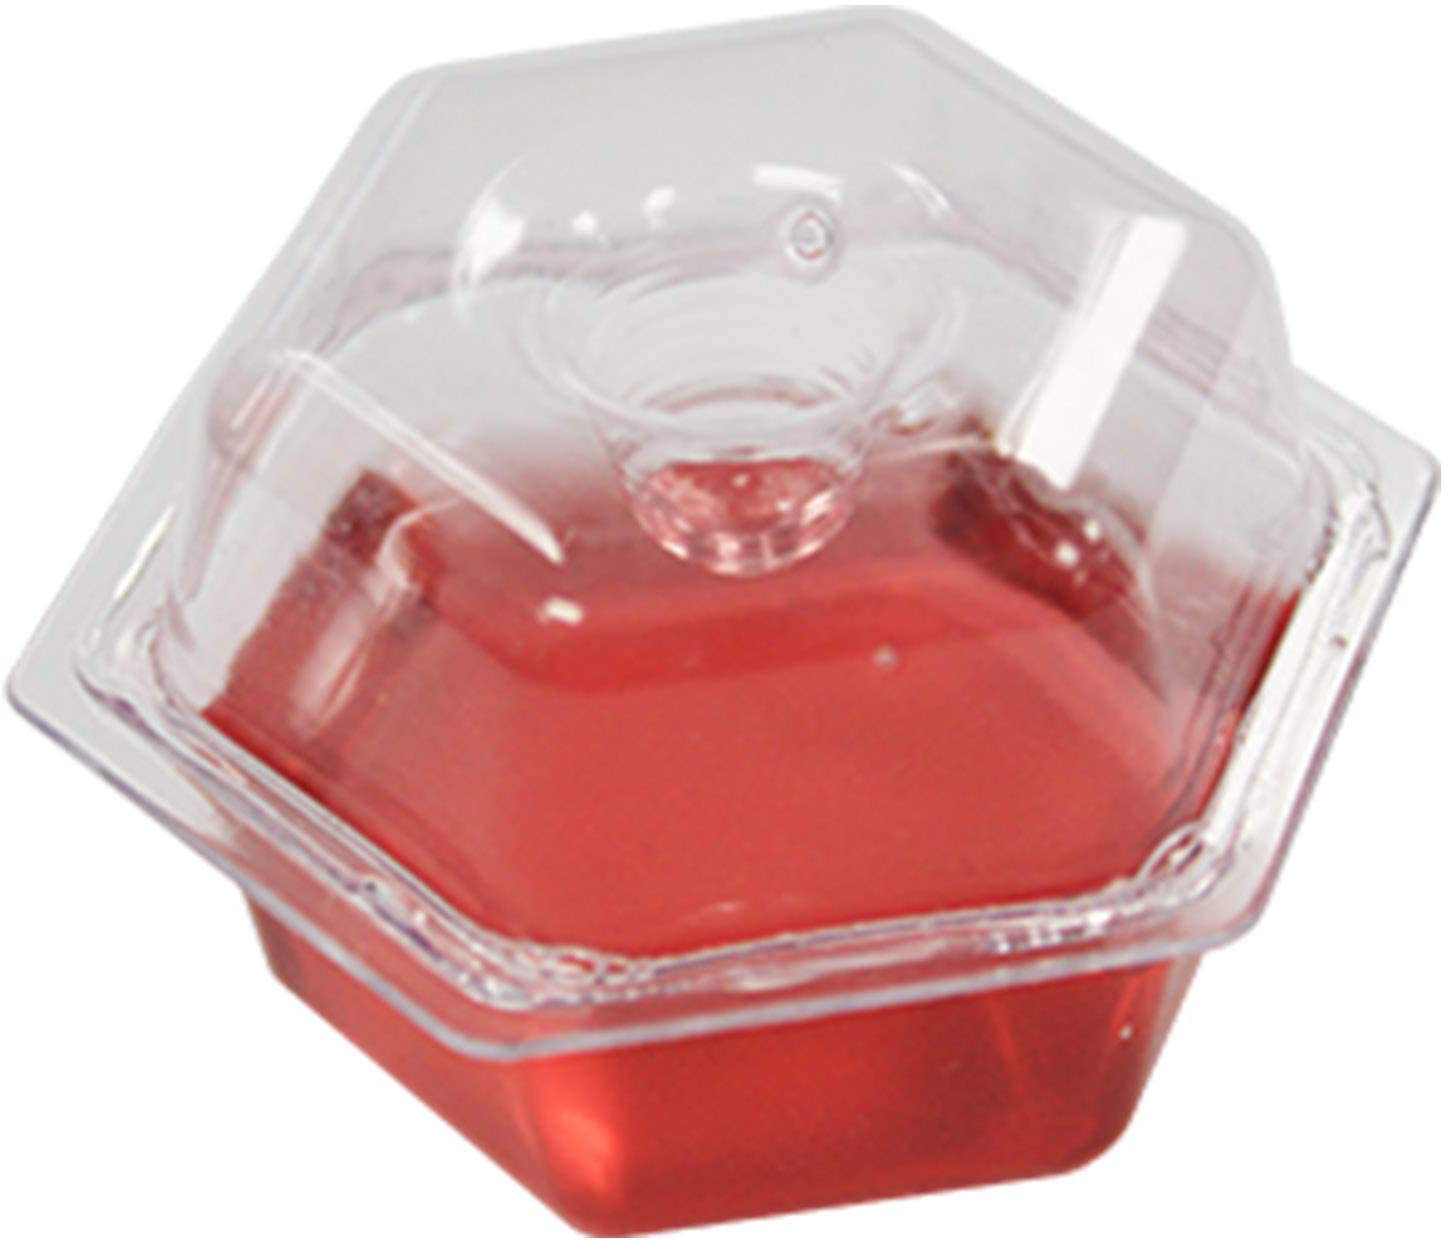 BEAPCO 10036 Prefilled Fruit Fly Traps, 6-Pack, Red